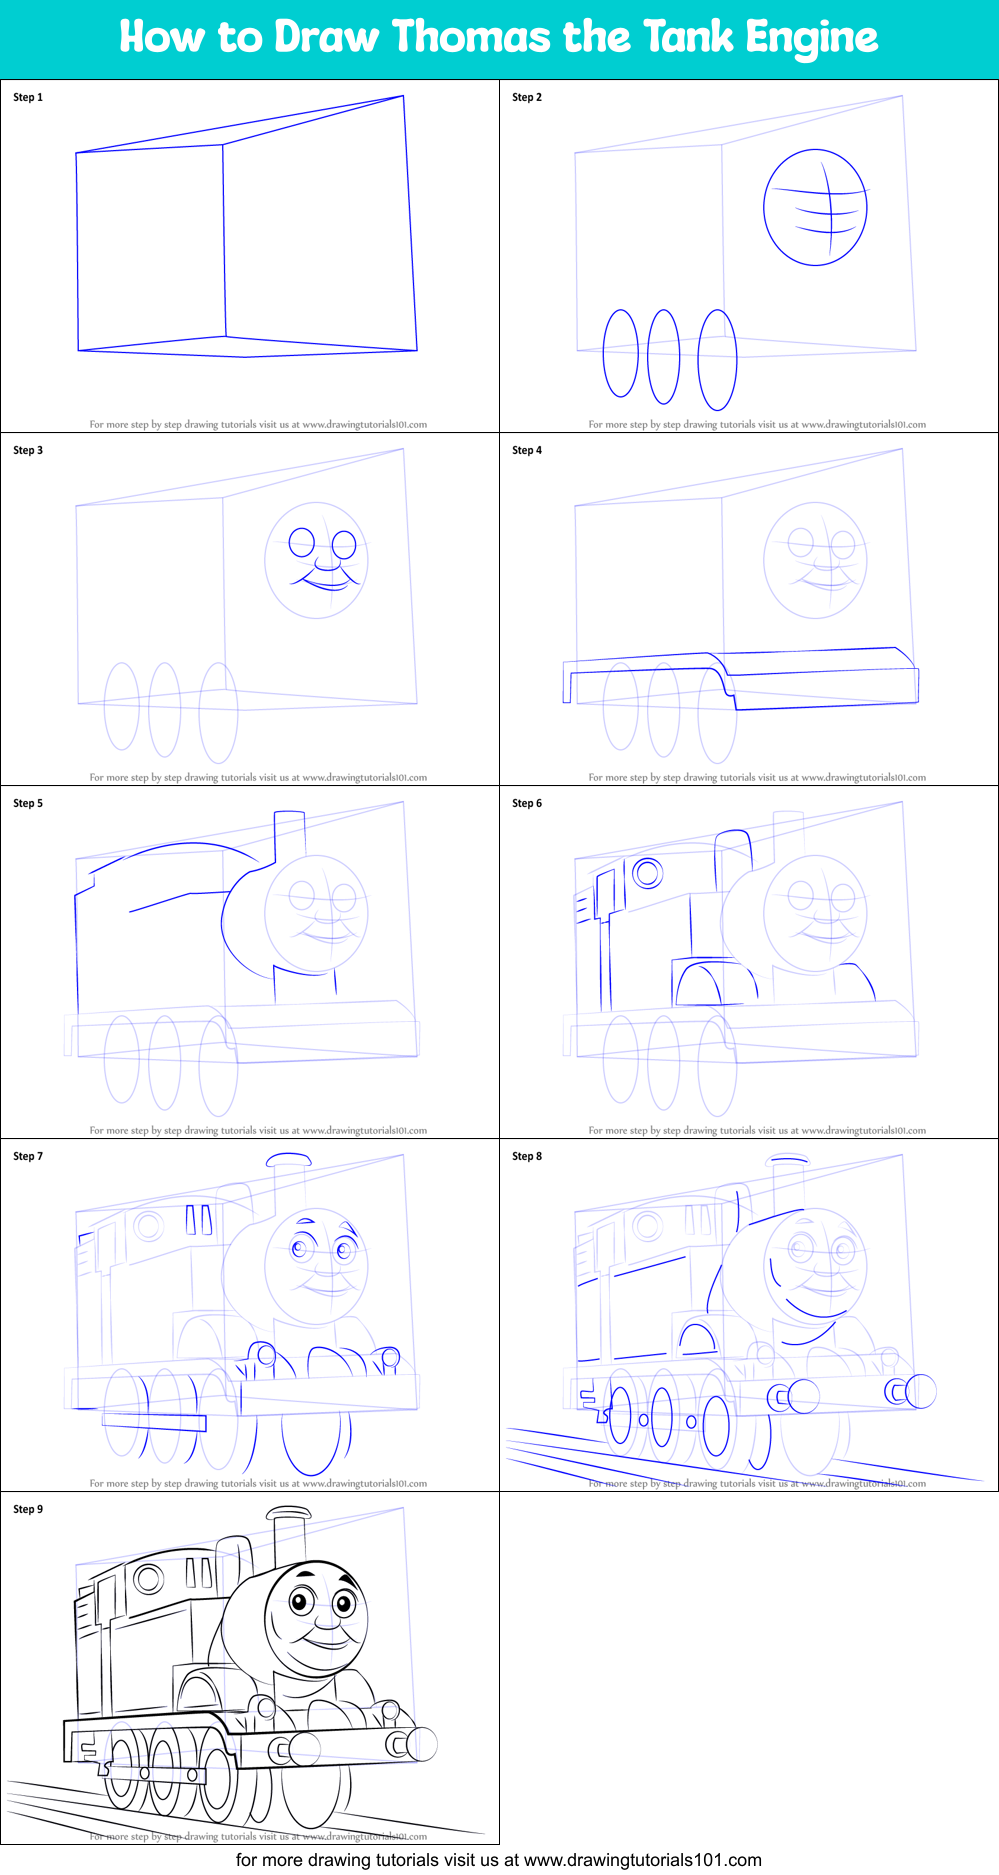 How to Draw Thomas the Tank Engine printable step by step drawing sheet